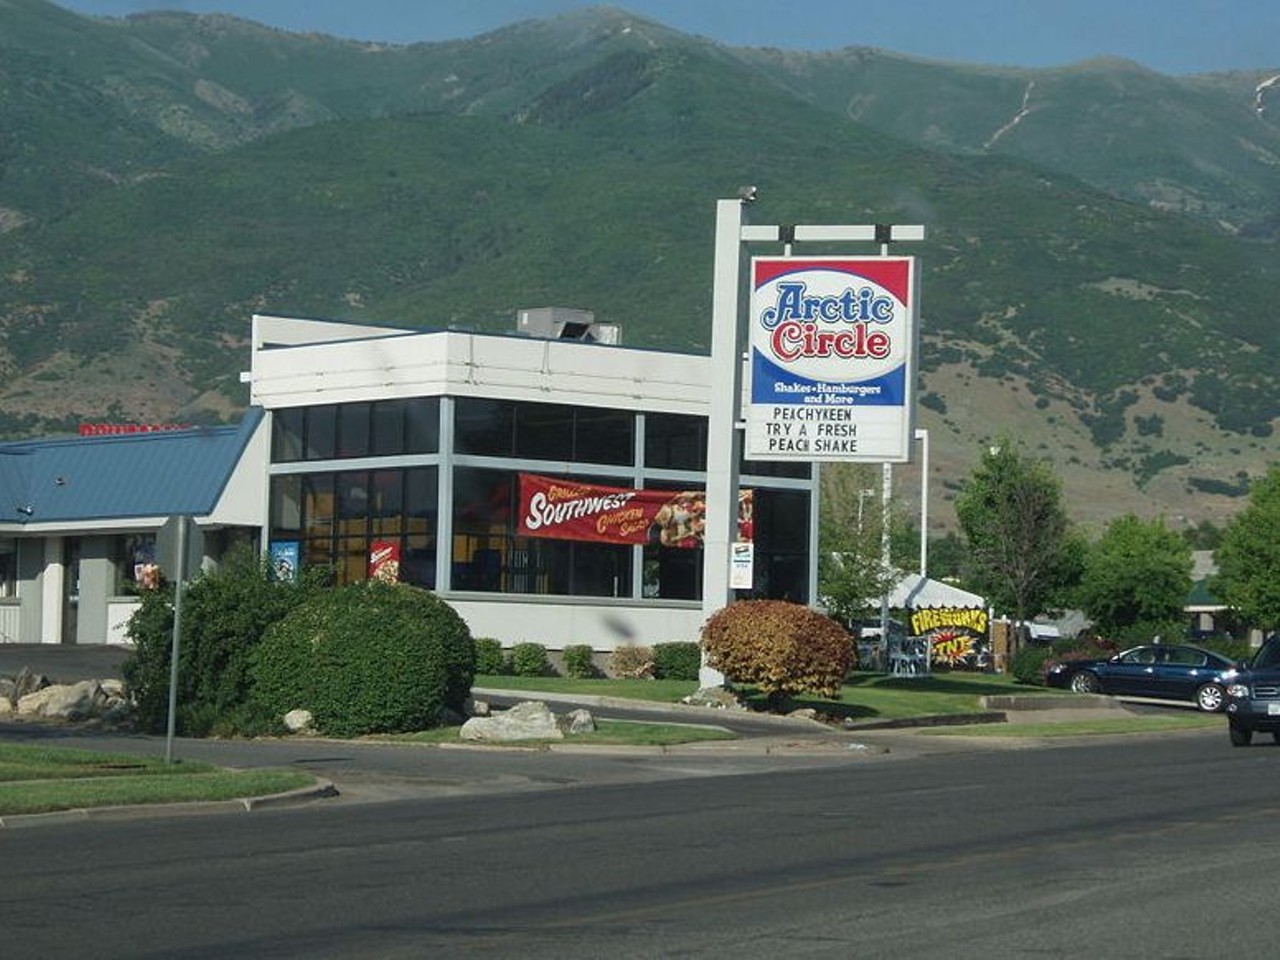 Arctic Circle
Black Angus burgers and real, crispy halibut are just two reasons why we&#146;d love to see this Utah-based franchise make its way to Detroit. A third reason? Their top-secret FrySauce.
Photo via Wikipedia